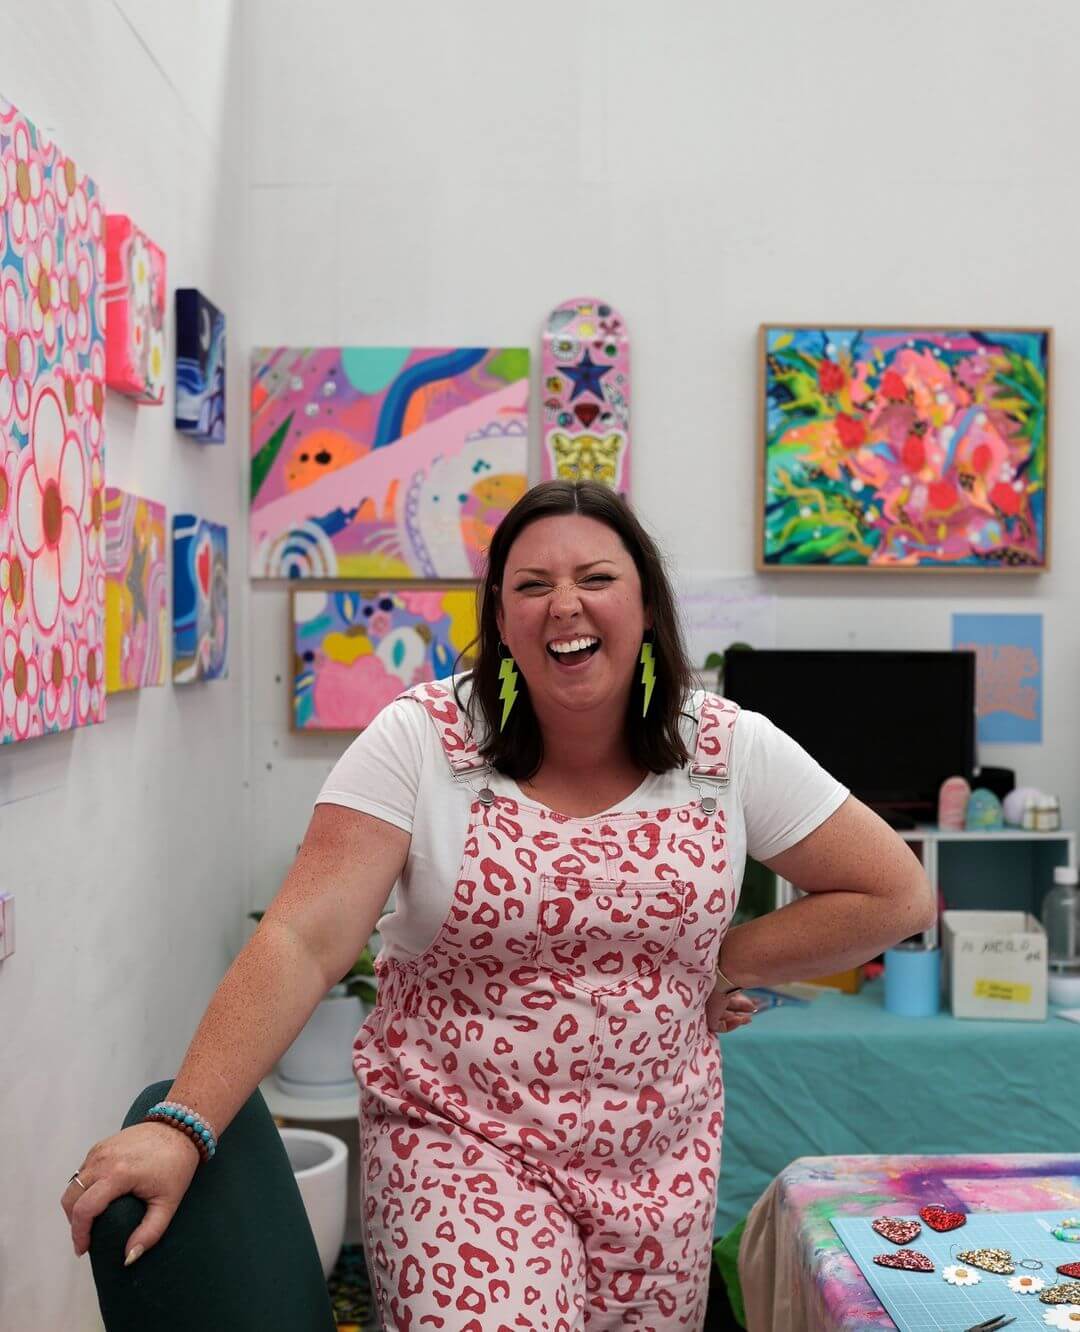 4. Artist Claire Monique laughing in her studio, wearing  pink leopard print overalls and yellow lightning bolt earrings.